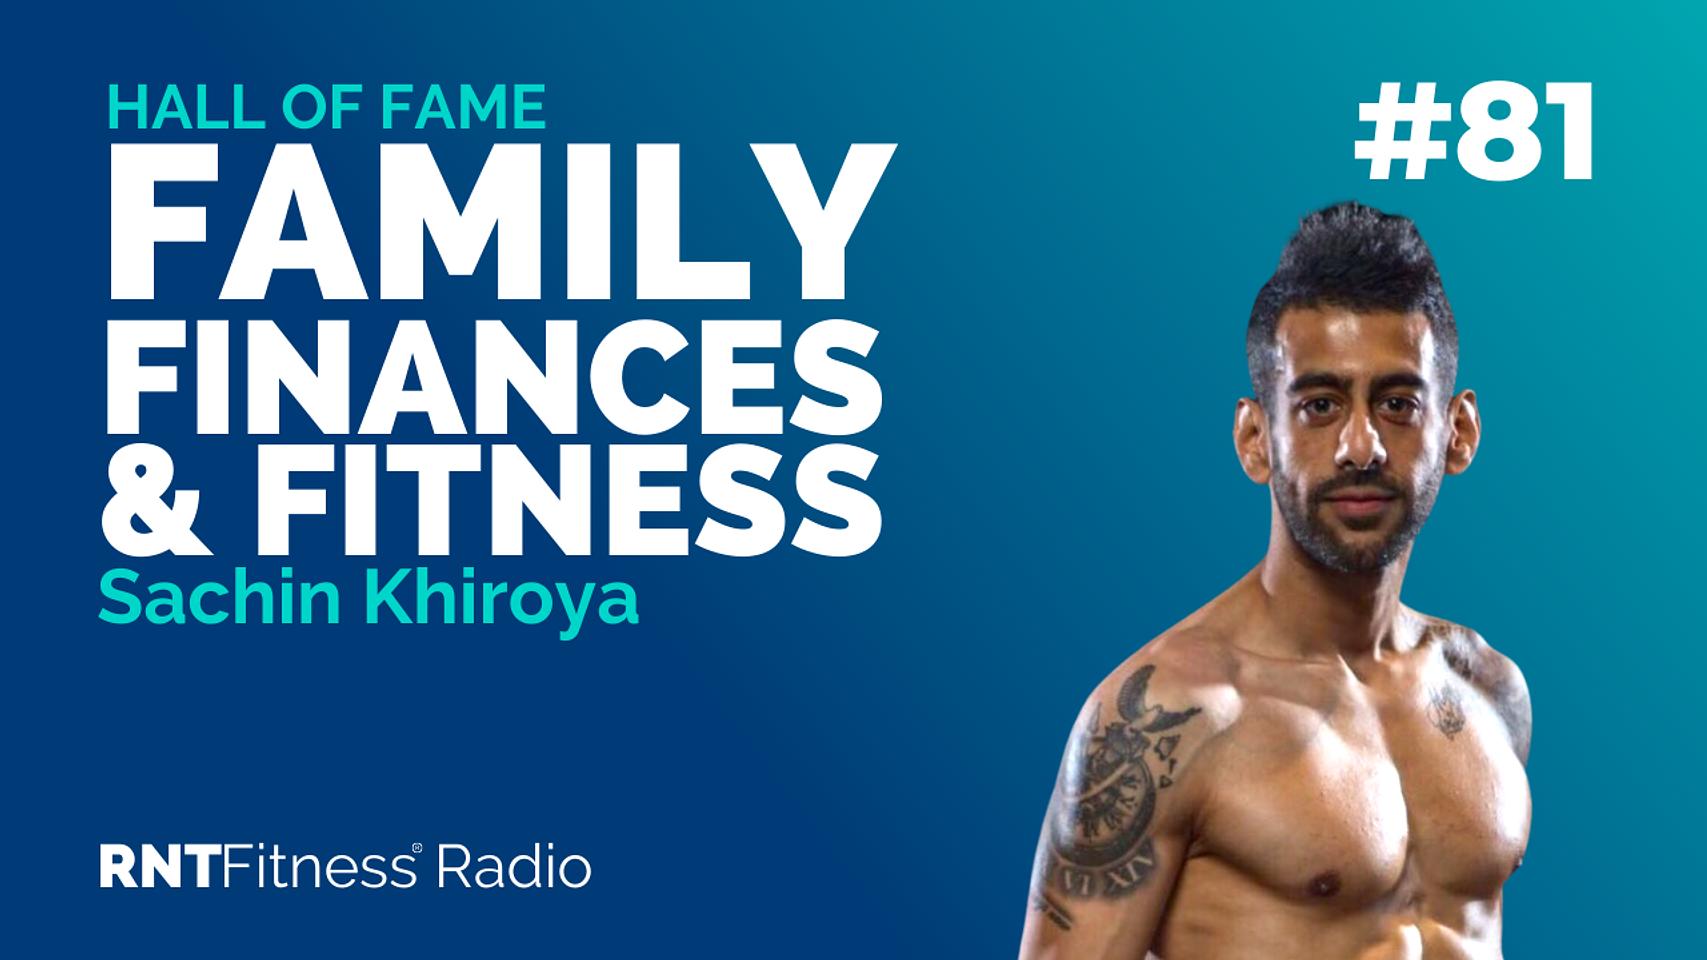 Ep. 81 - Hall of Fame | Sachin Khiroya – Going Through The Journey While Balancing Family, Finance & Fitness